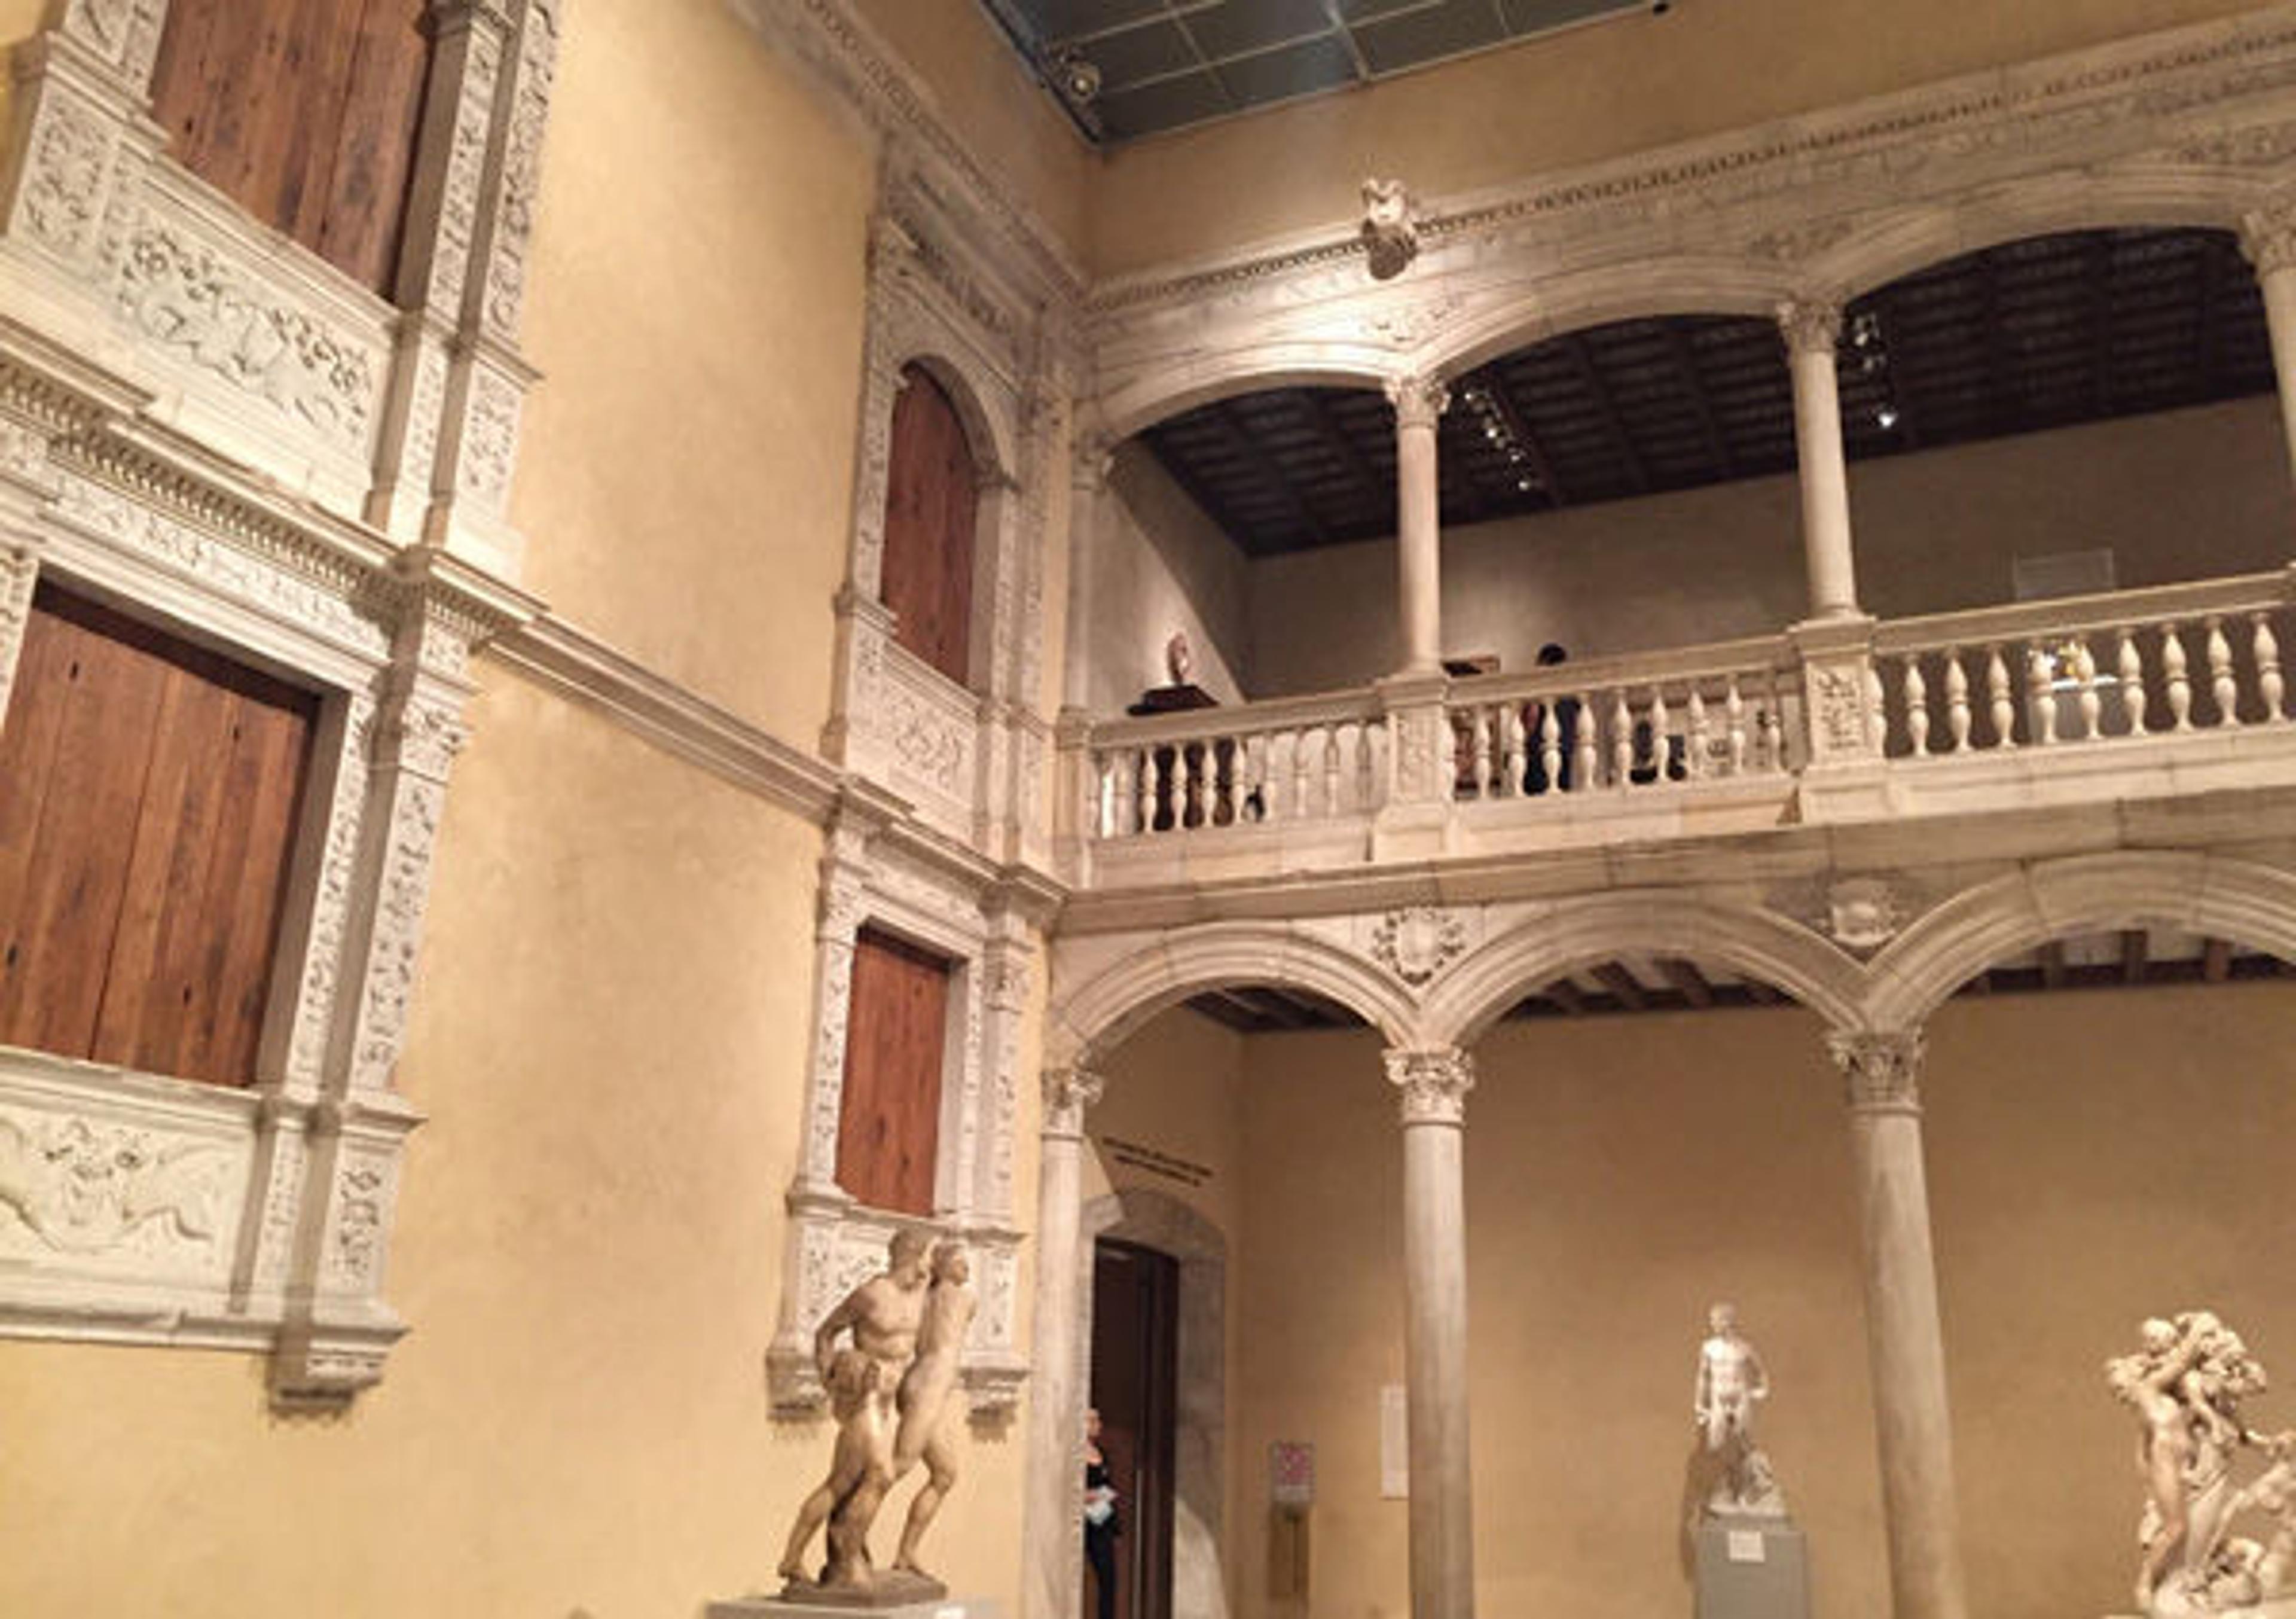 Gallery 534: Patio from the Castle of Vélez Blanco, 1506–15. All photos courtesy of Met Museum Presents, except as noted